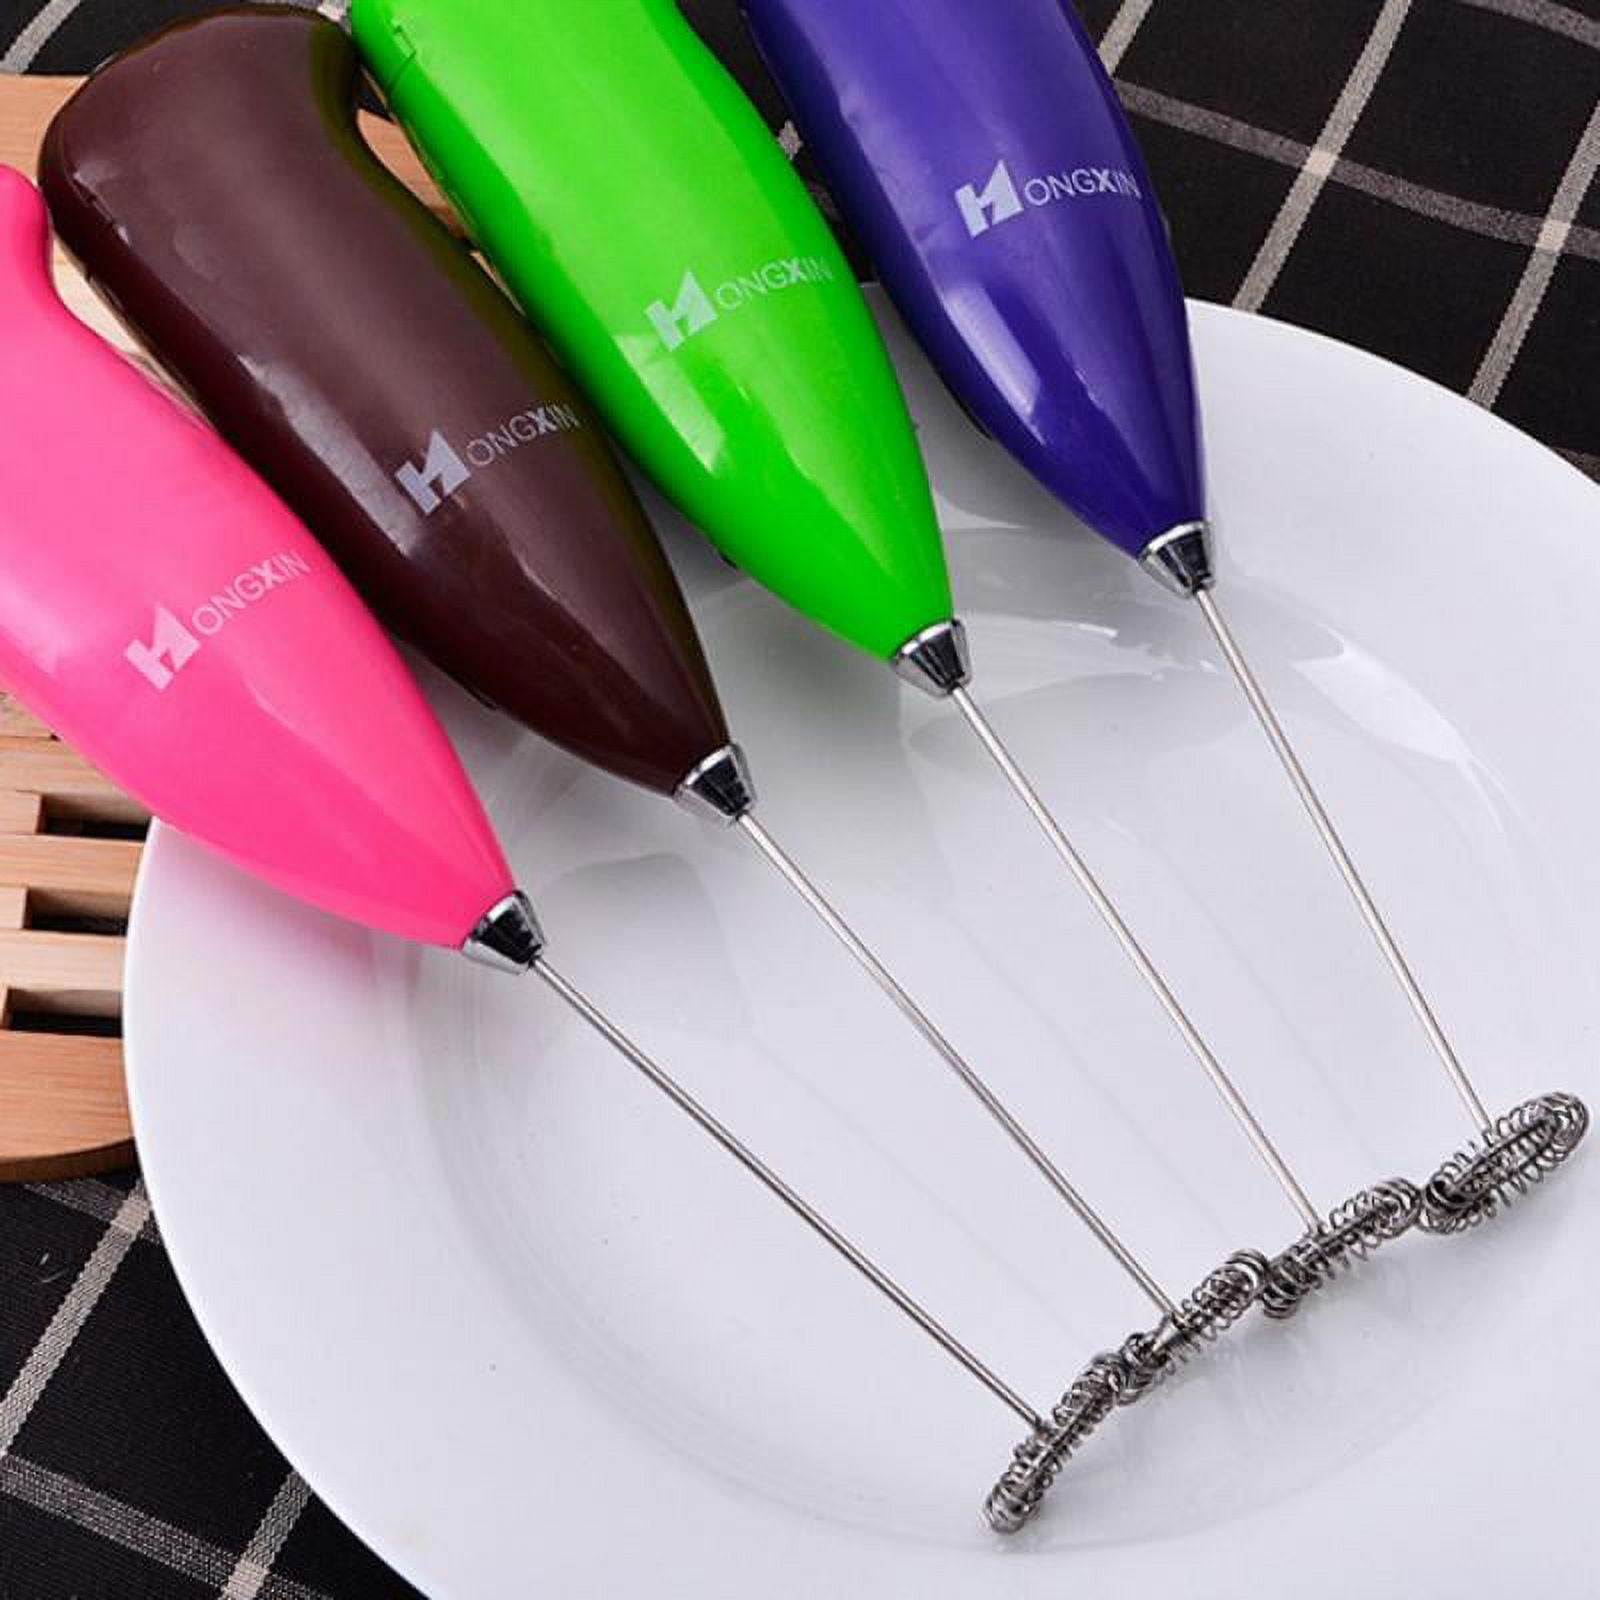 Dropship Egg Beater Electric Handheld Rotary Egg Whisk Coffee